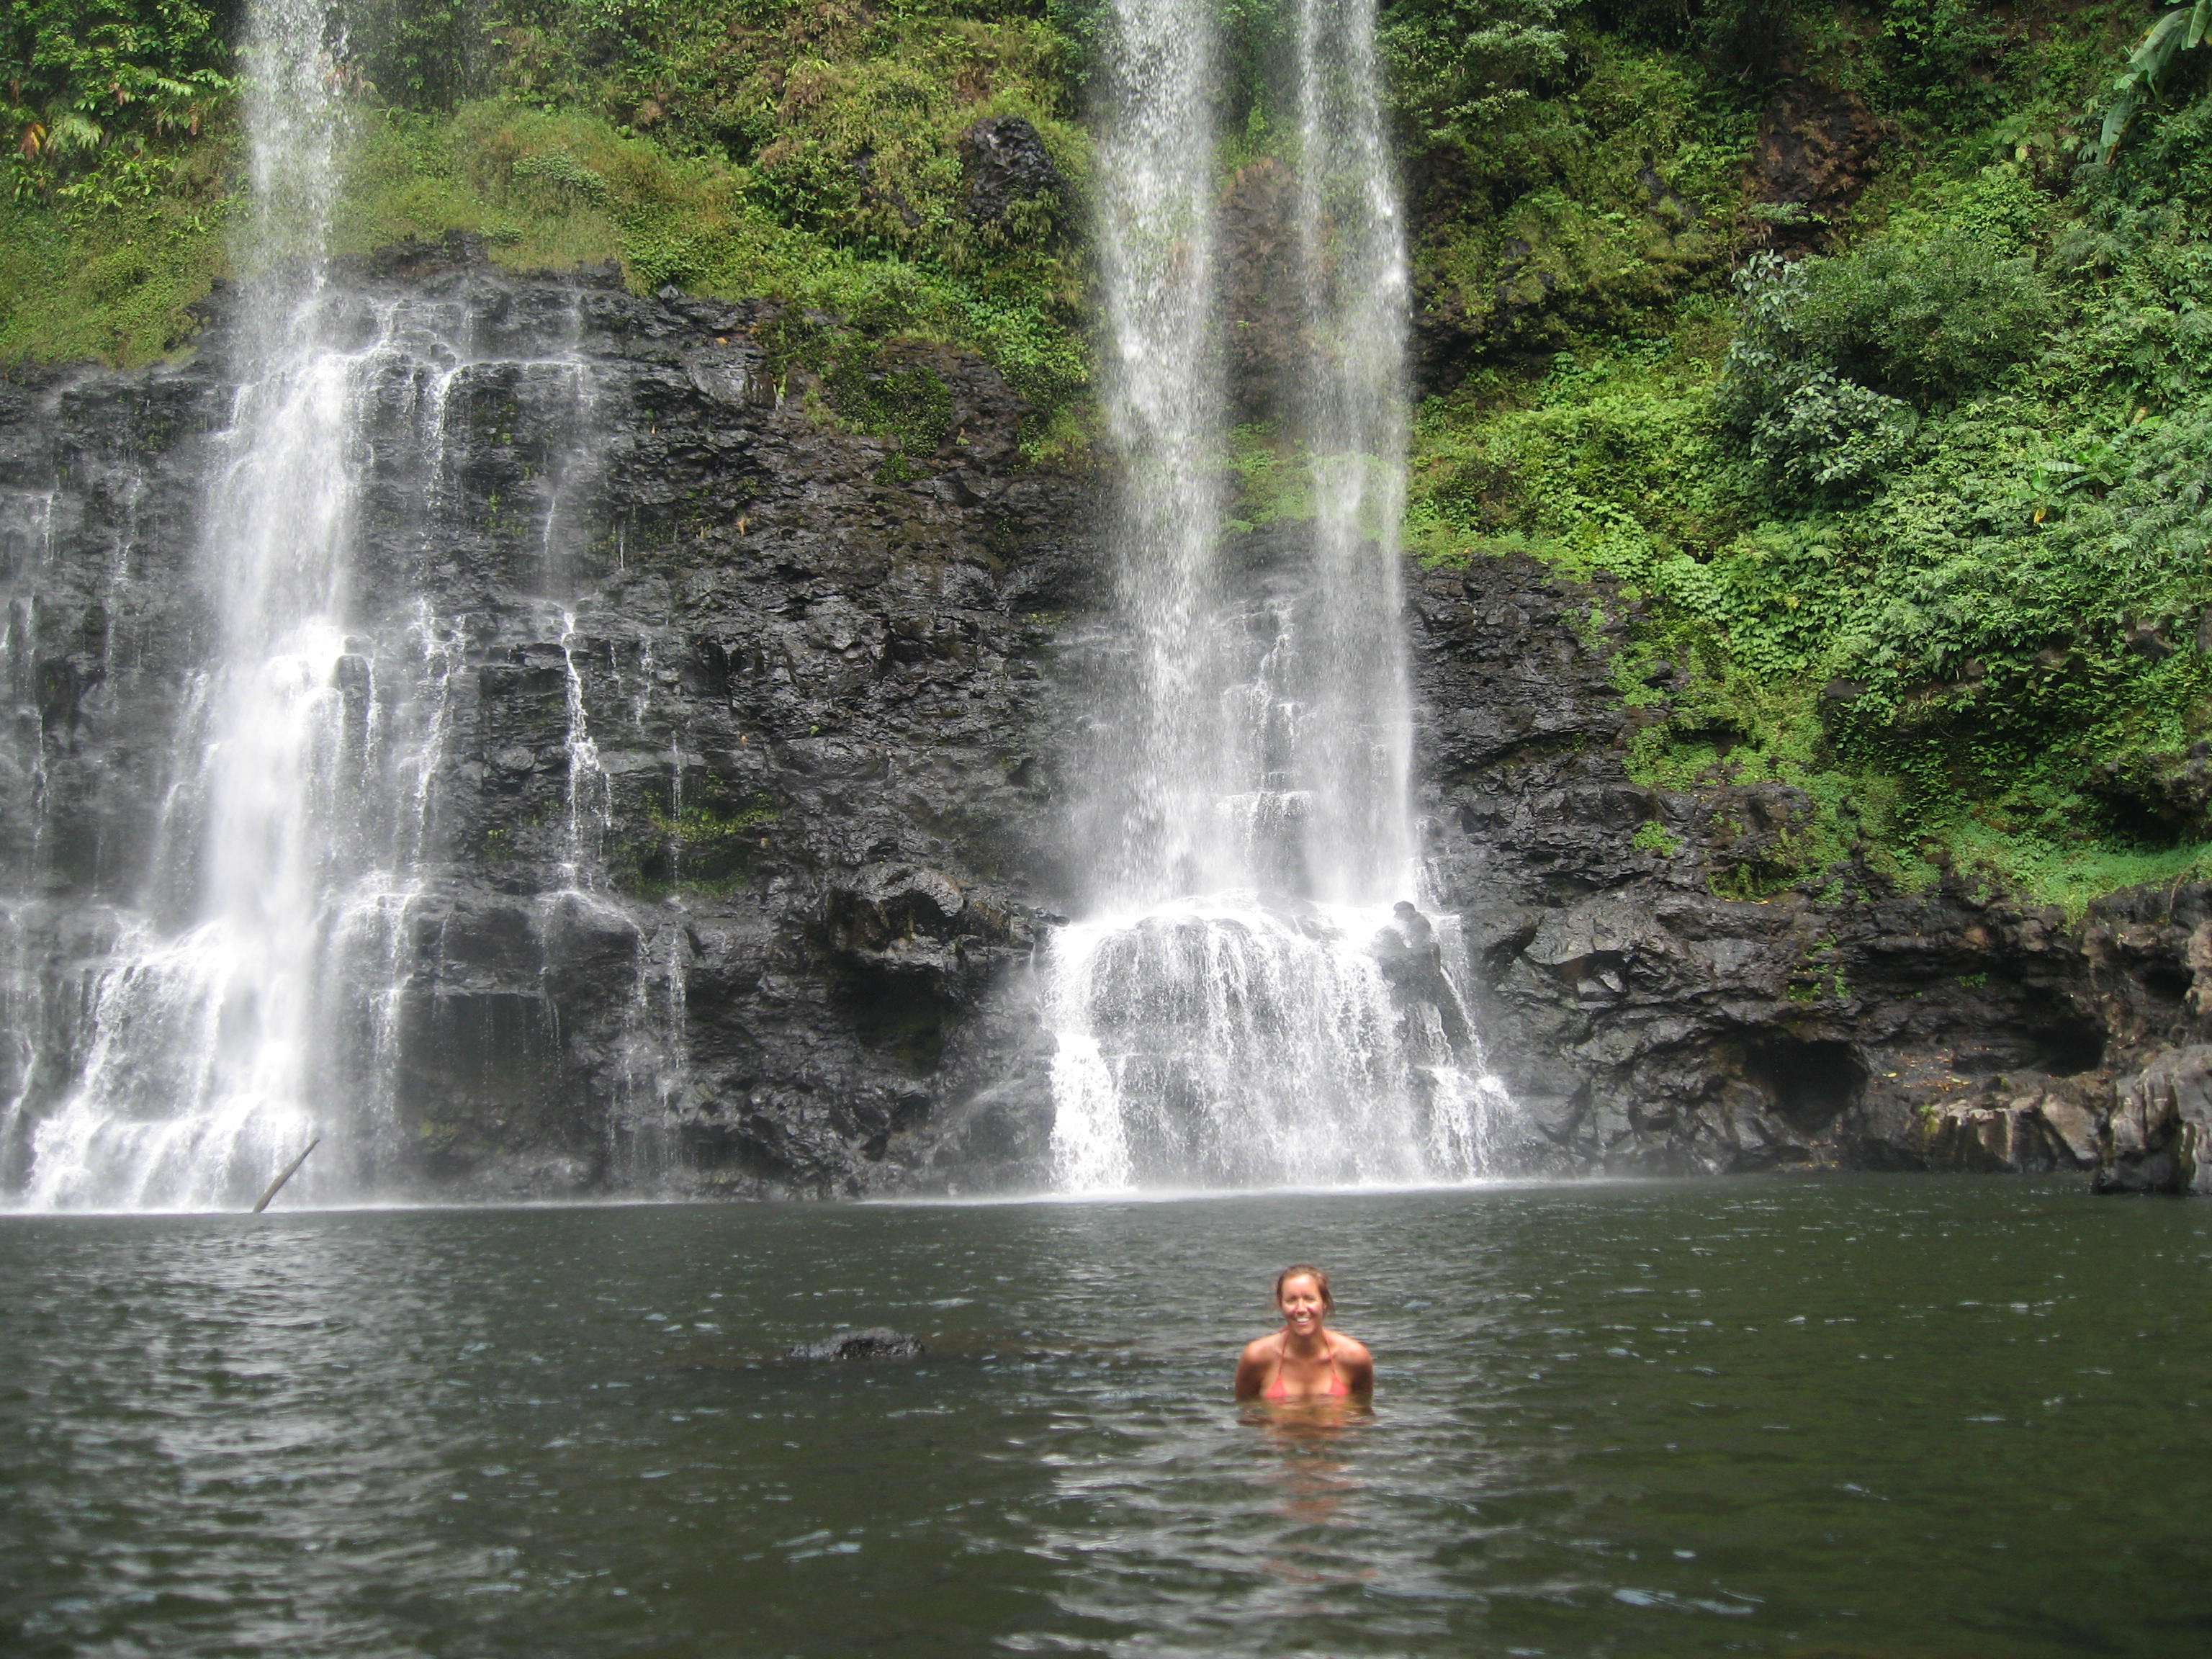 Cooling off from my motorbike ride with a quick dip in a local waterfall in the Bolaven Plateau, Laos.